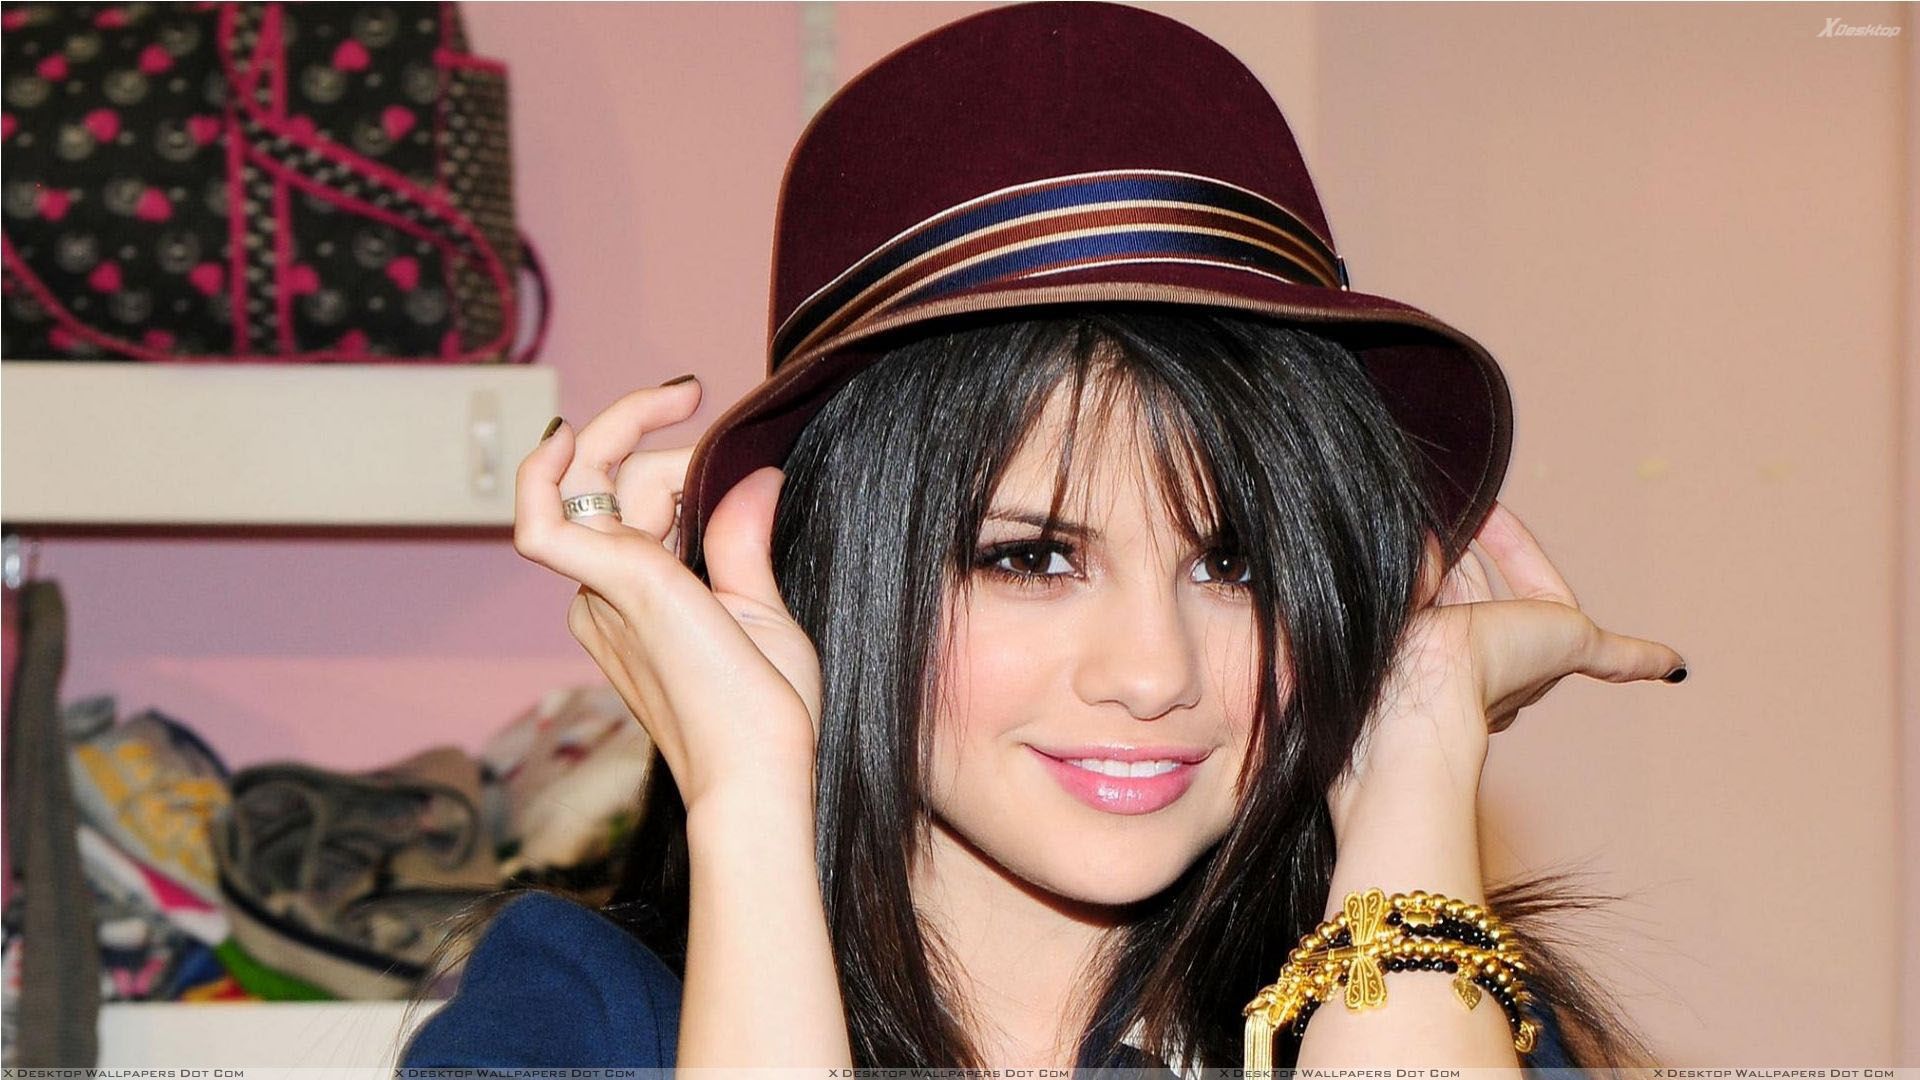 Selena Gomez Pink Lips Smiling And Wearing Hat Face Closeup.jpg ...